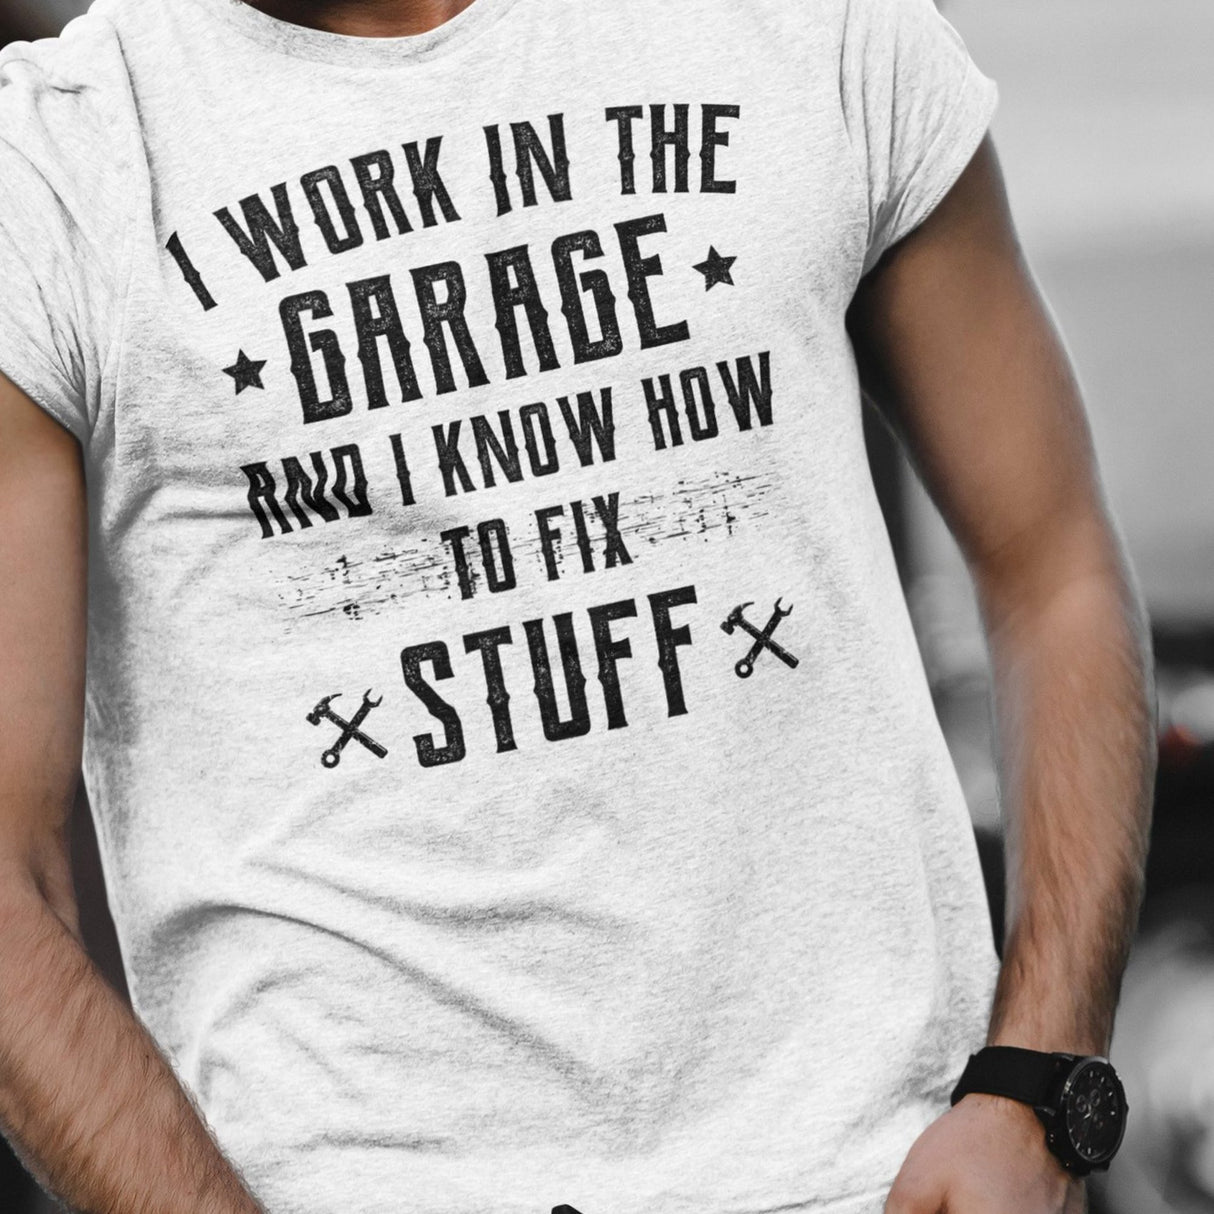 i-work-in-the-garage-and-i-know-how-to-fix-stuff-work-tee-garage-t-shirt-fix-stuff-tee-t-shirt-tee#color_white